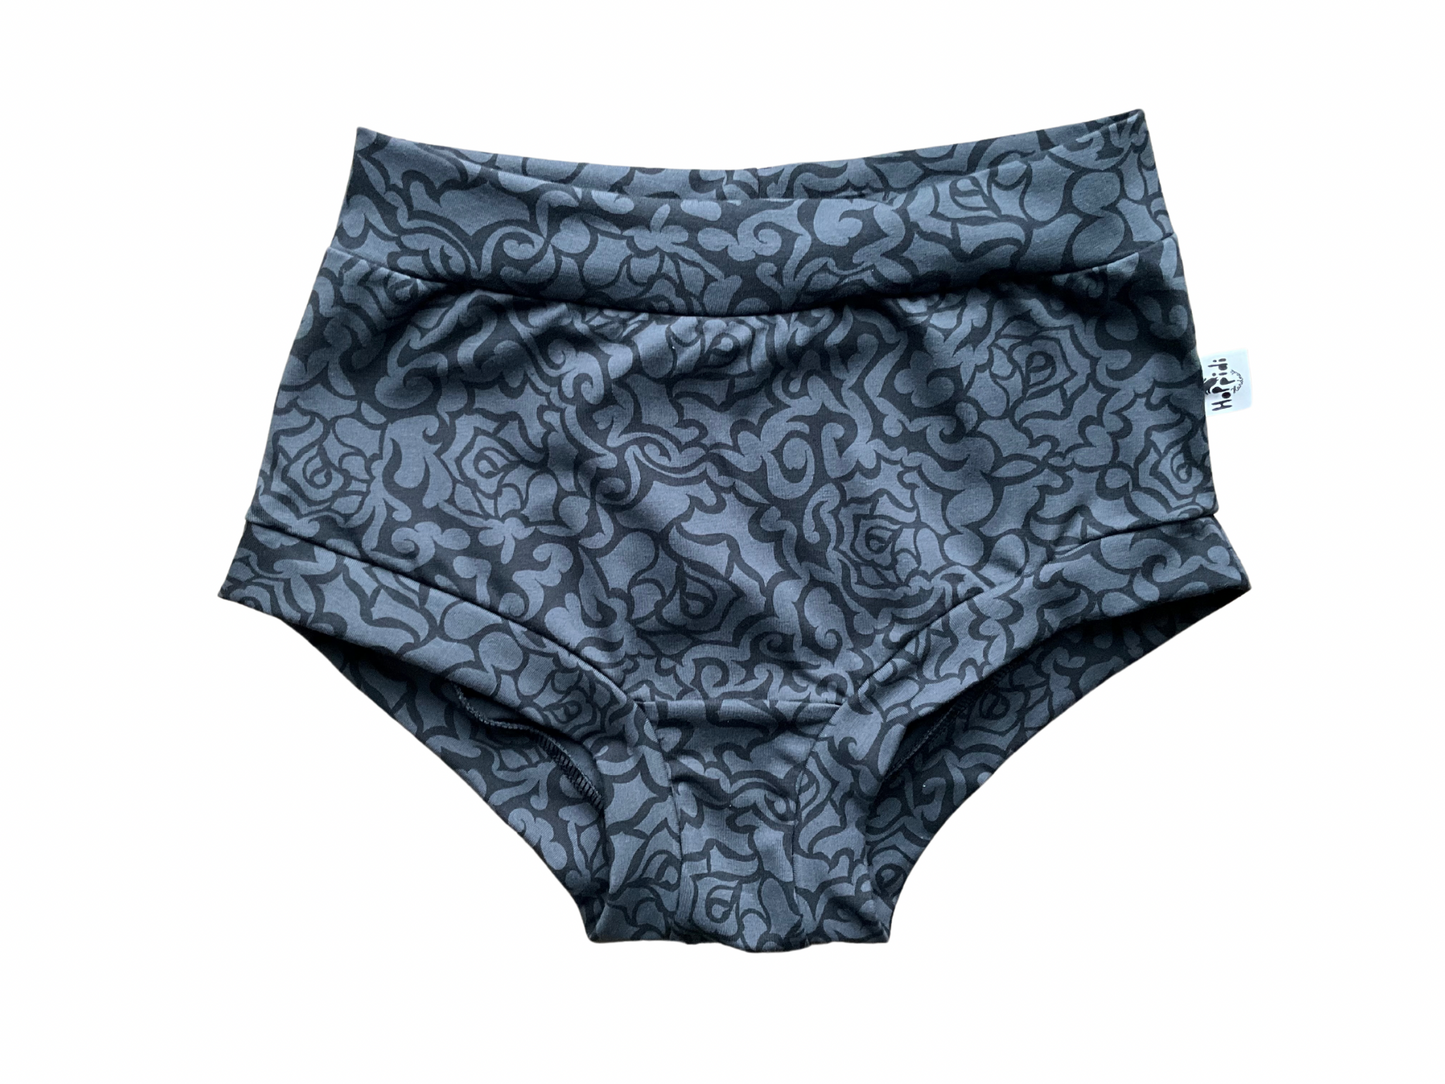 High waisted women’s brief style underwear with black roses drawn on anthracite background 